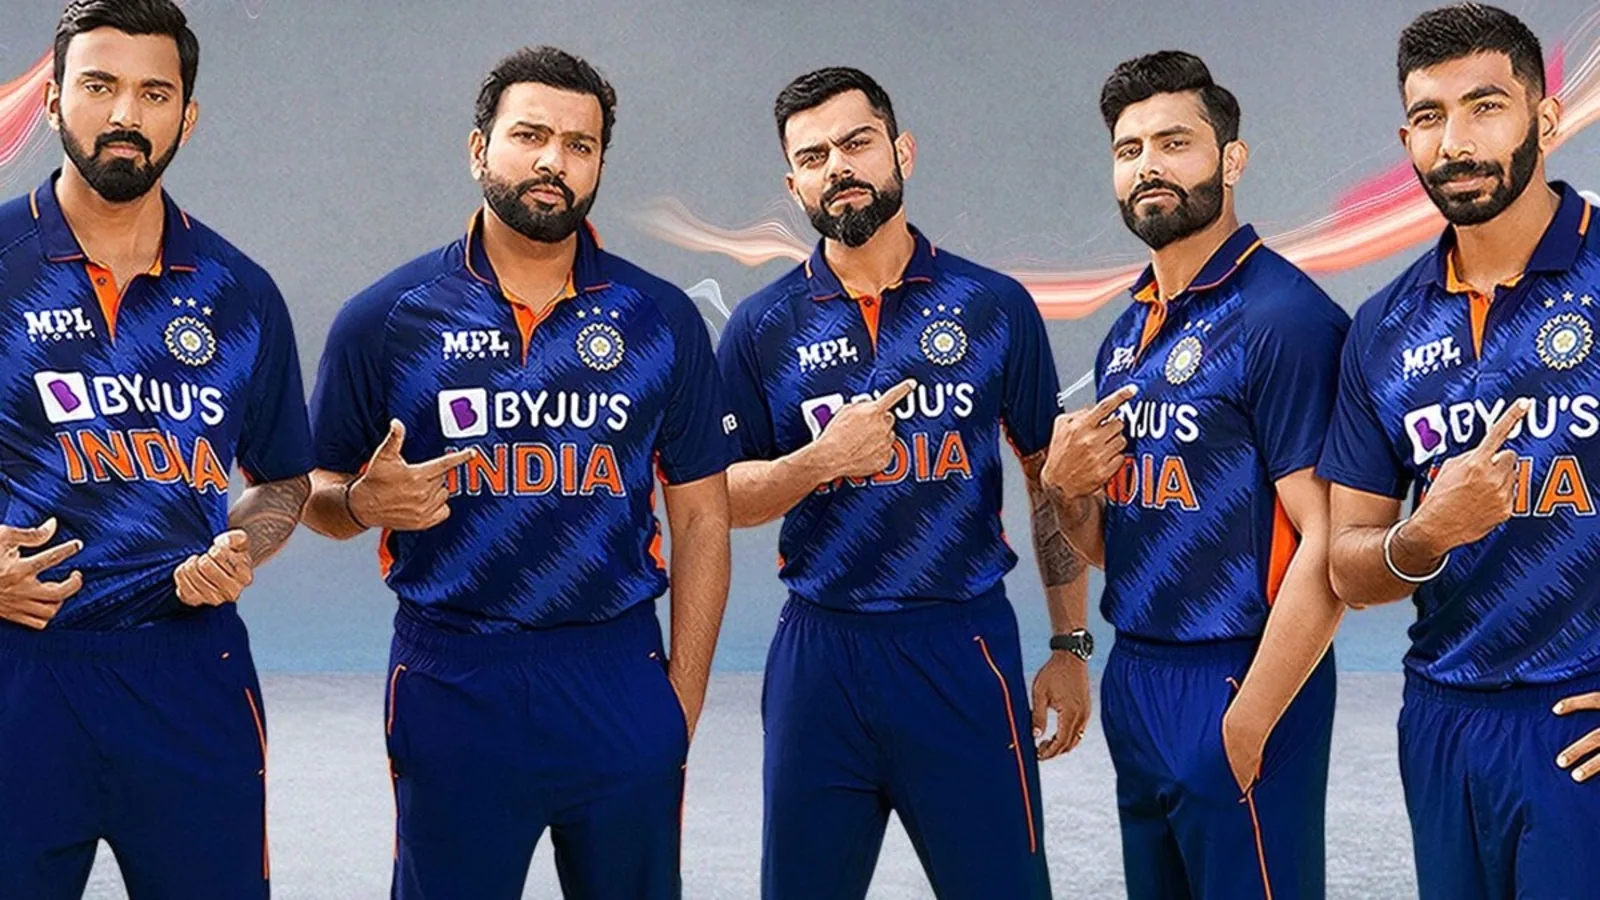 india-new-jersey_1634114268092_1634114275156